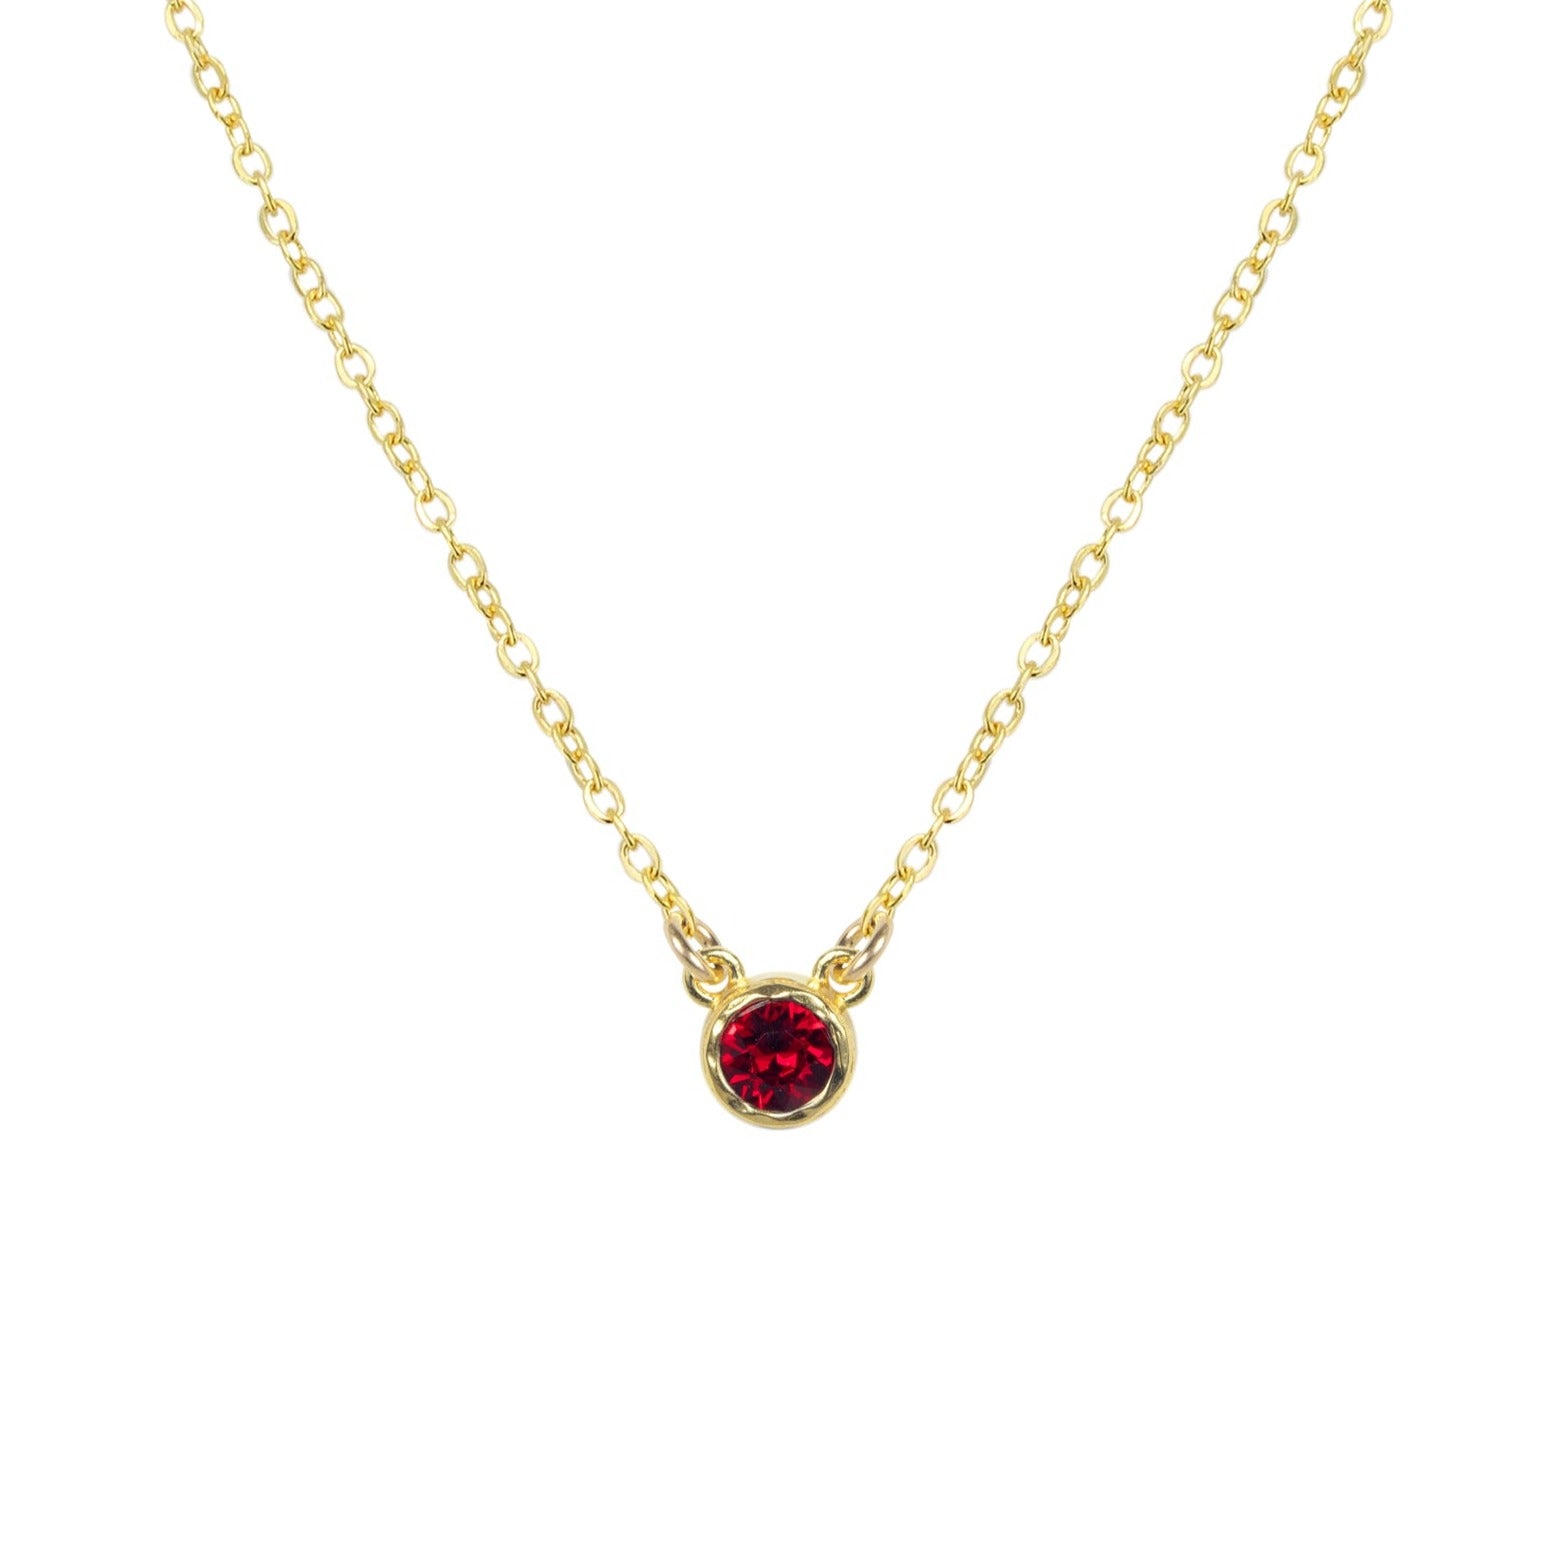 Buy Small Dainty Ruby Pendant Necklace 18k Gold Red Gemstone Minimal Ruby  Marquise Necklace Simple Solitaire Pendant Valentine Day Gift Online in  India - Etsy